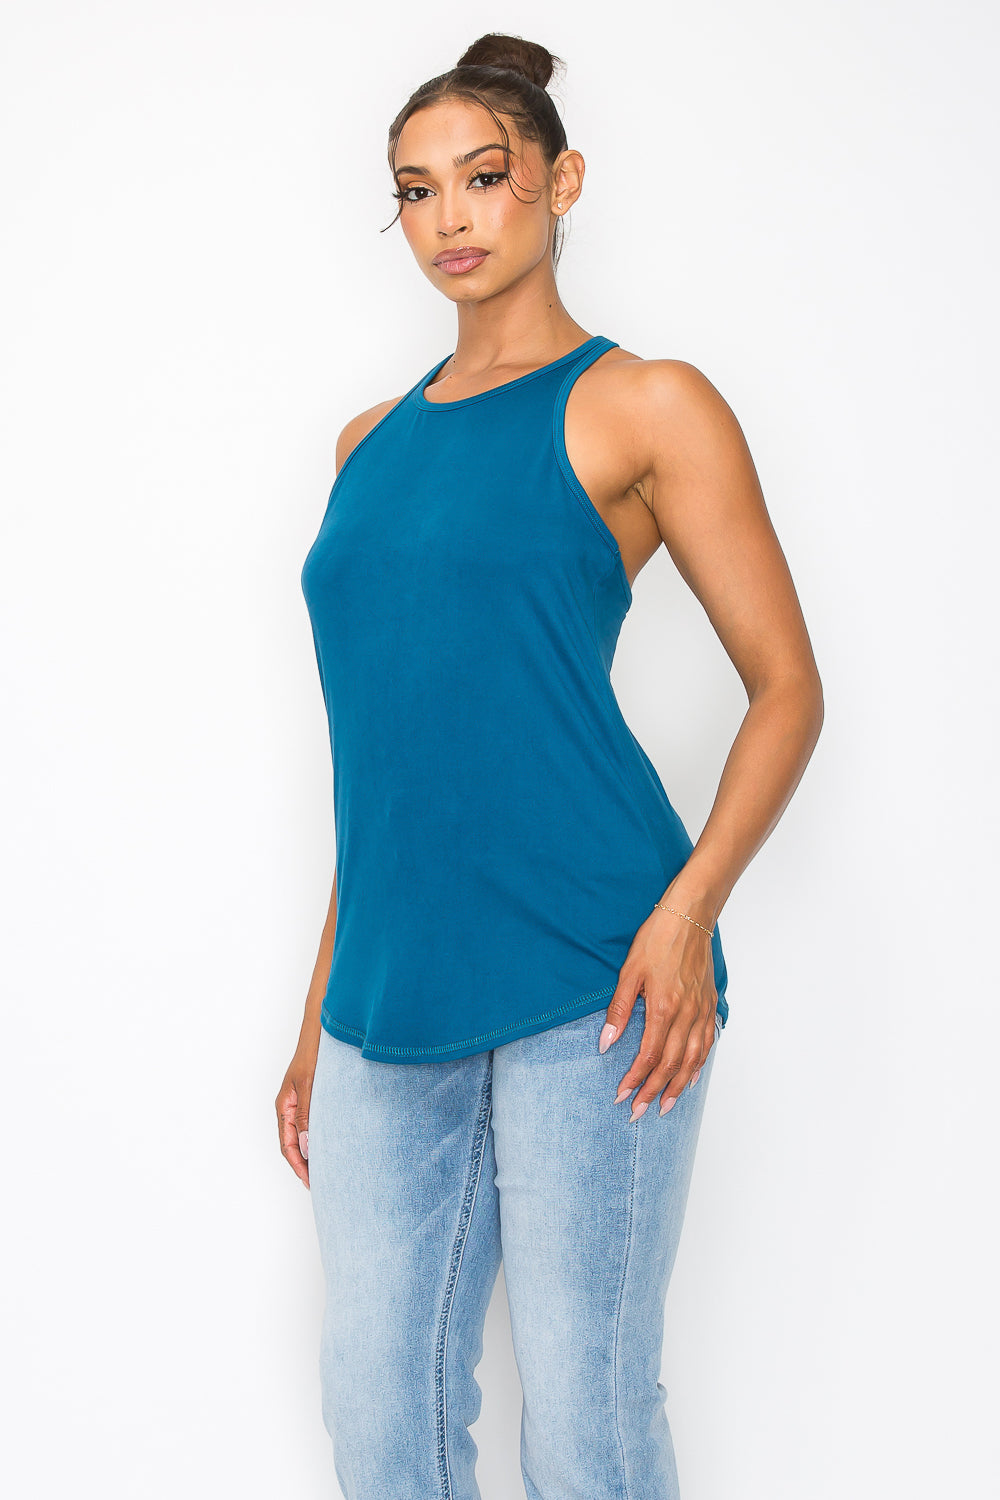 Strappy Y Back Tank Top - Teal